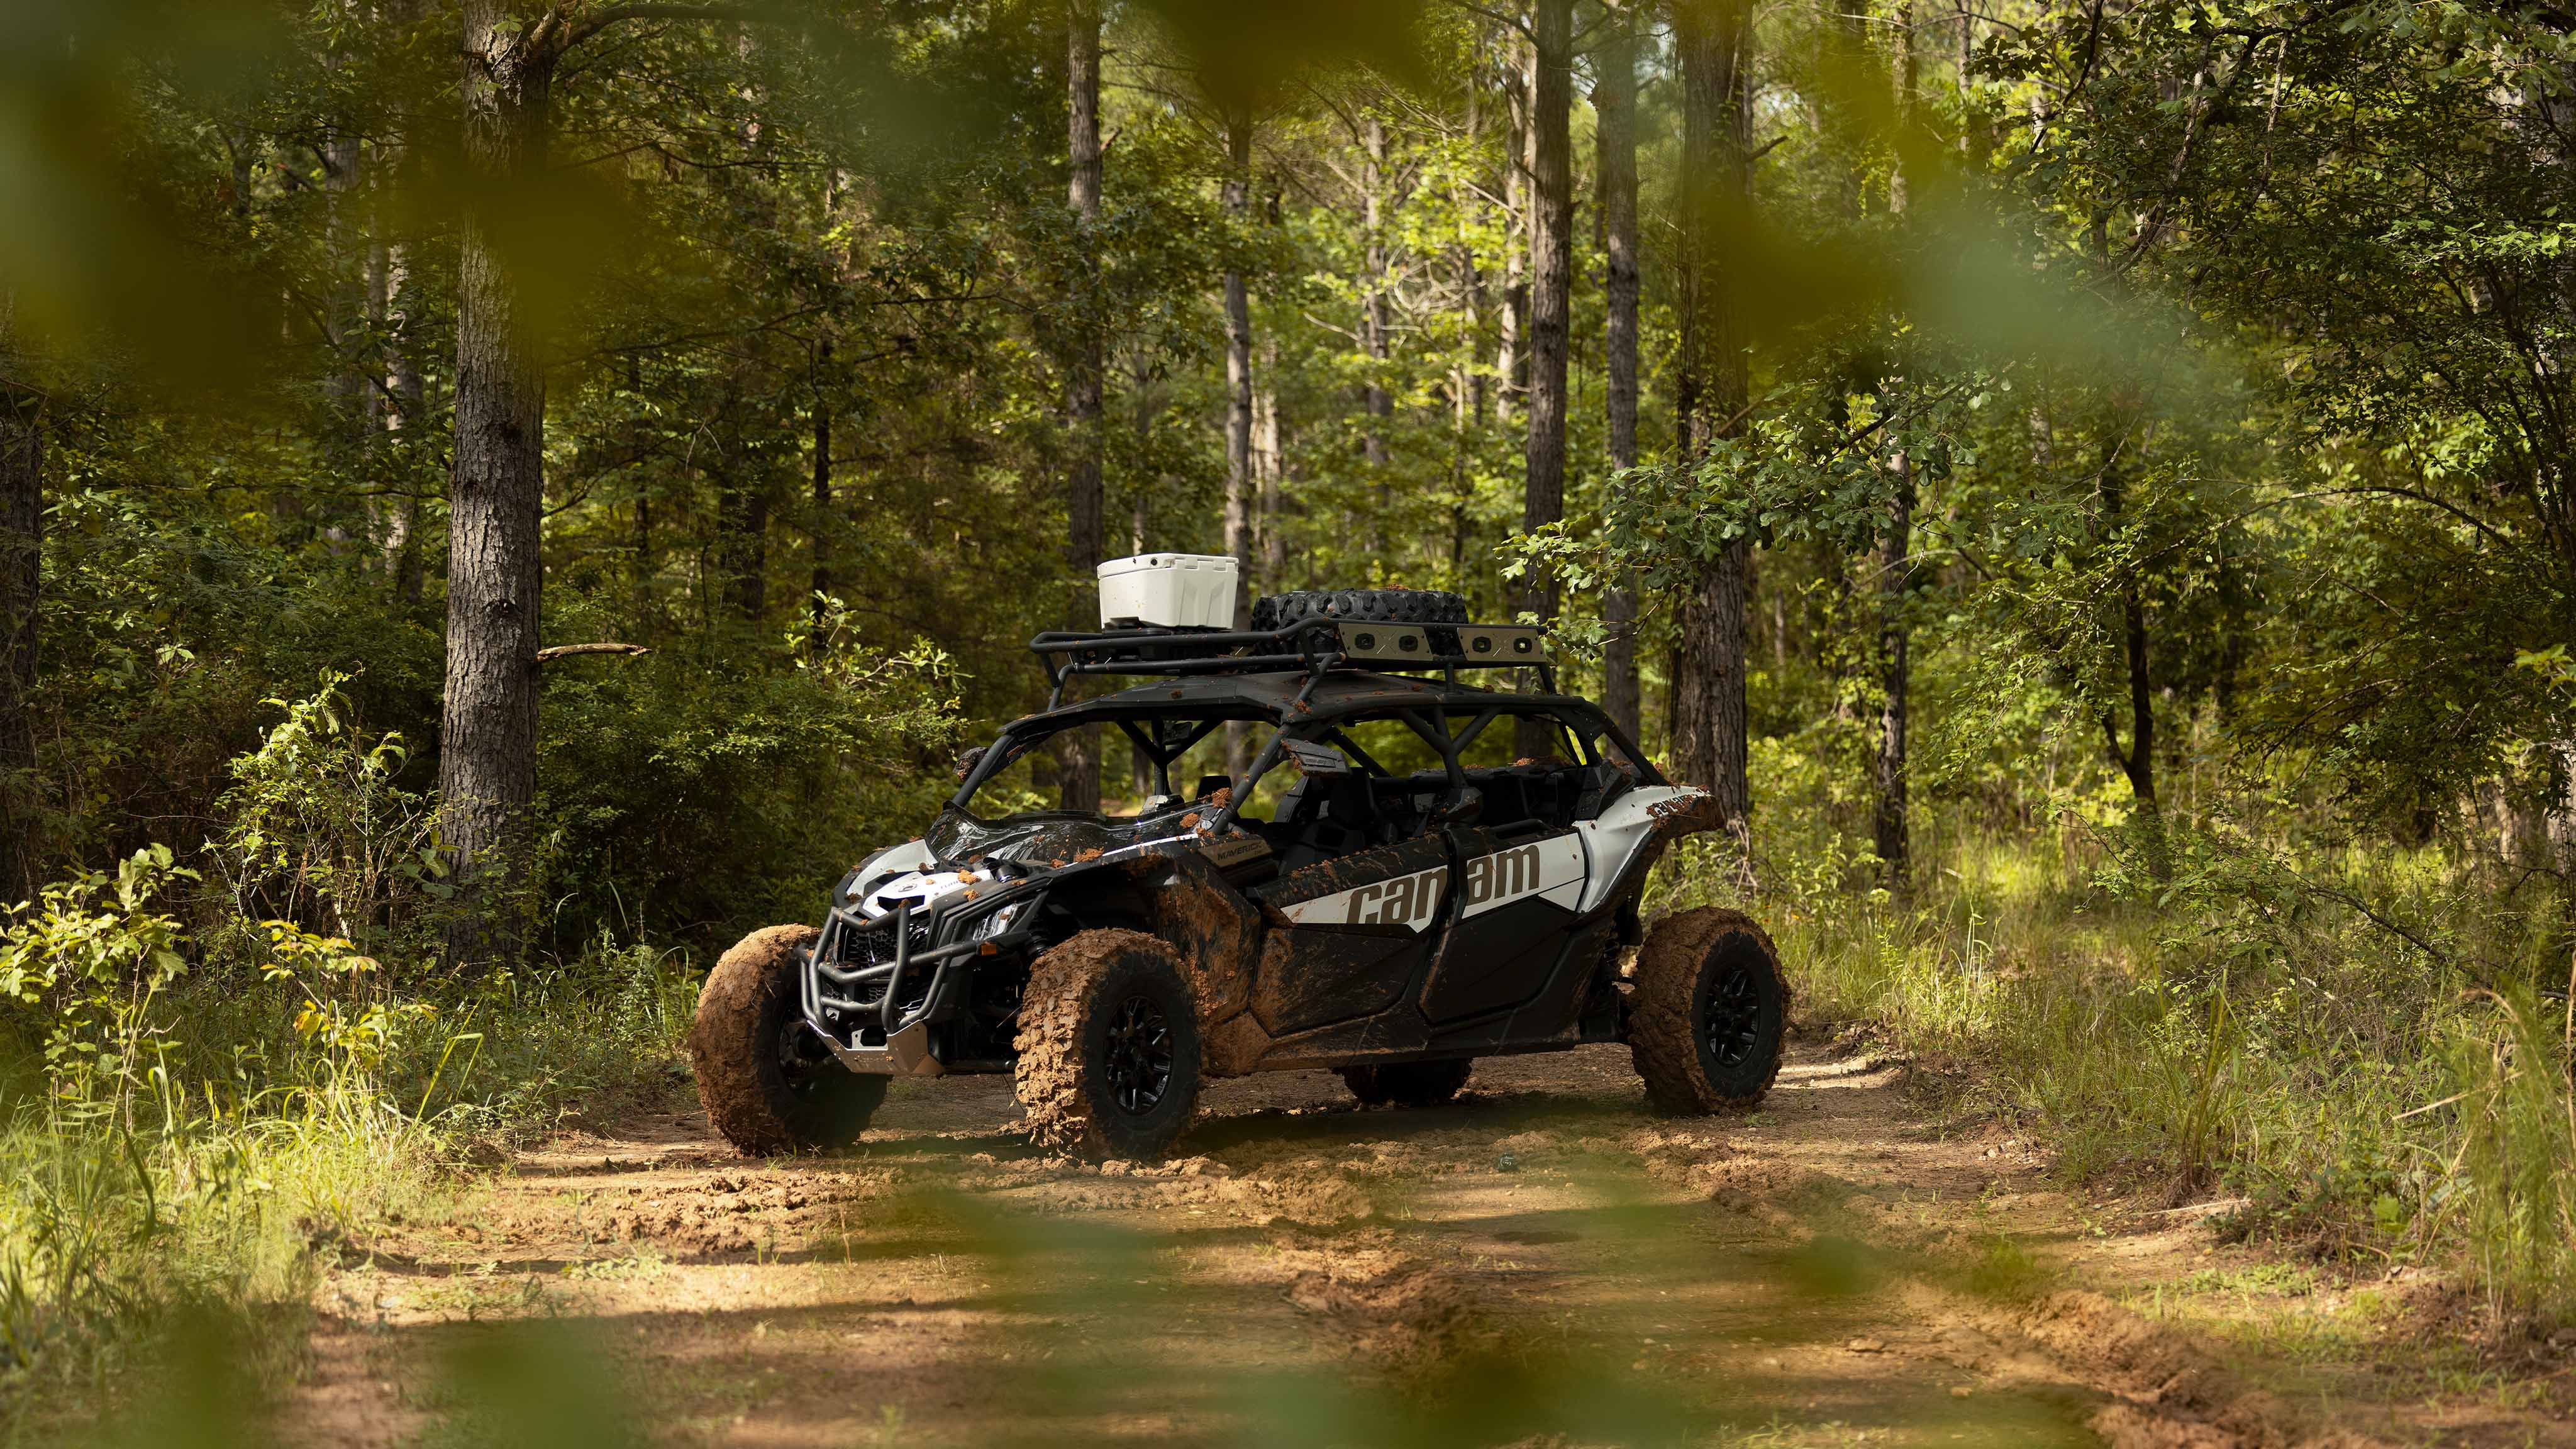 2023 Can-Am Maverick Sport Max DPS idle in a forest